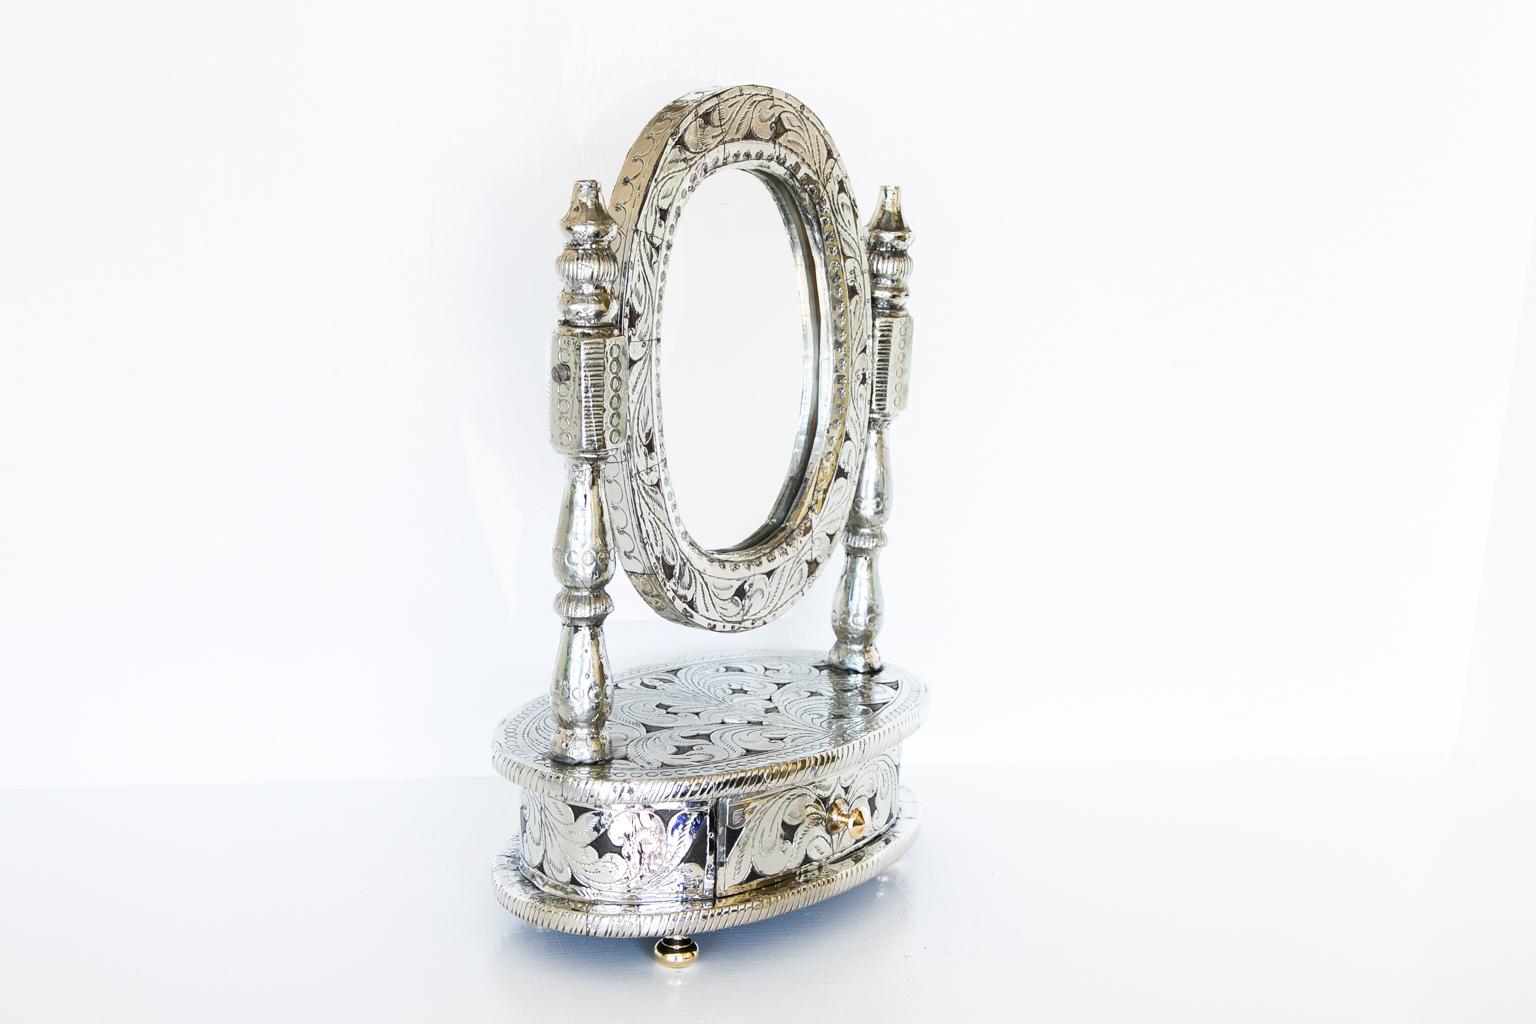 Dressing mirror with drawer, with engraved metal overlays and floral arabesque patterns covering the entirety. The drawer’s knob and feet are cast brass.